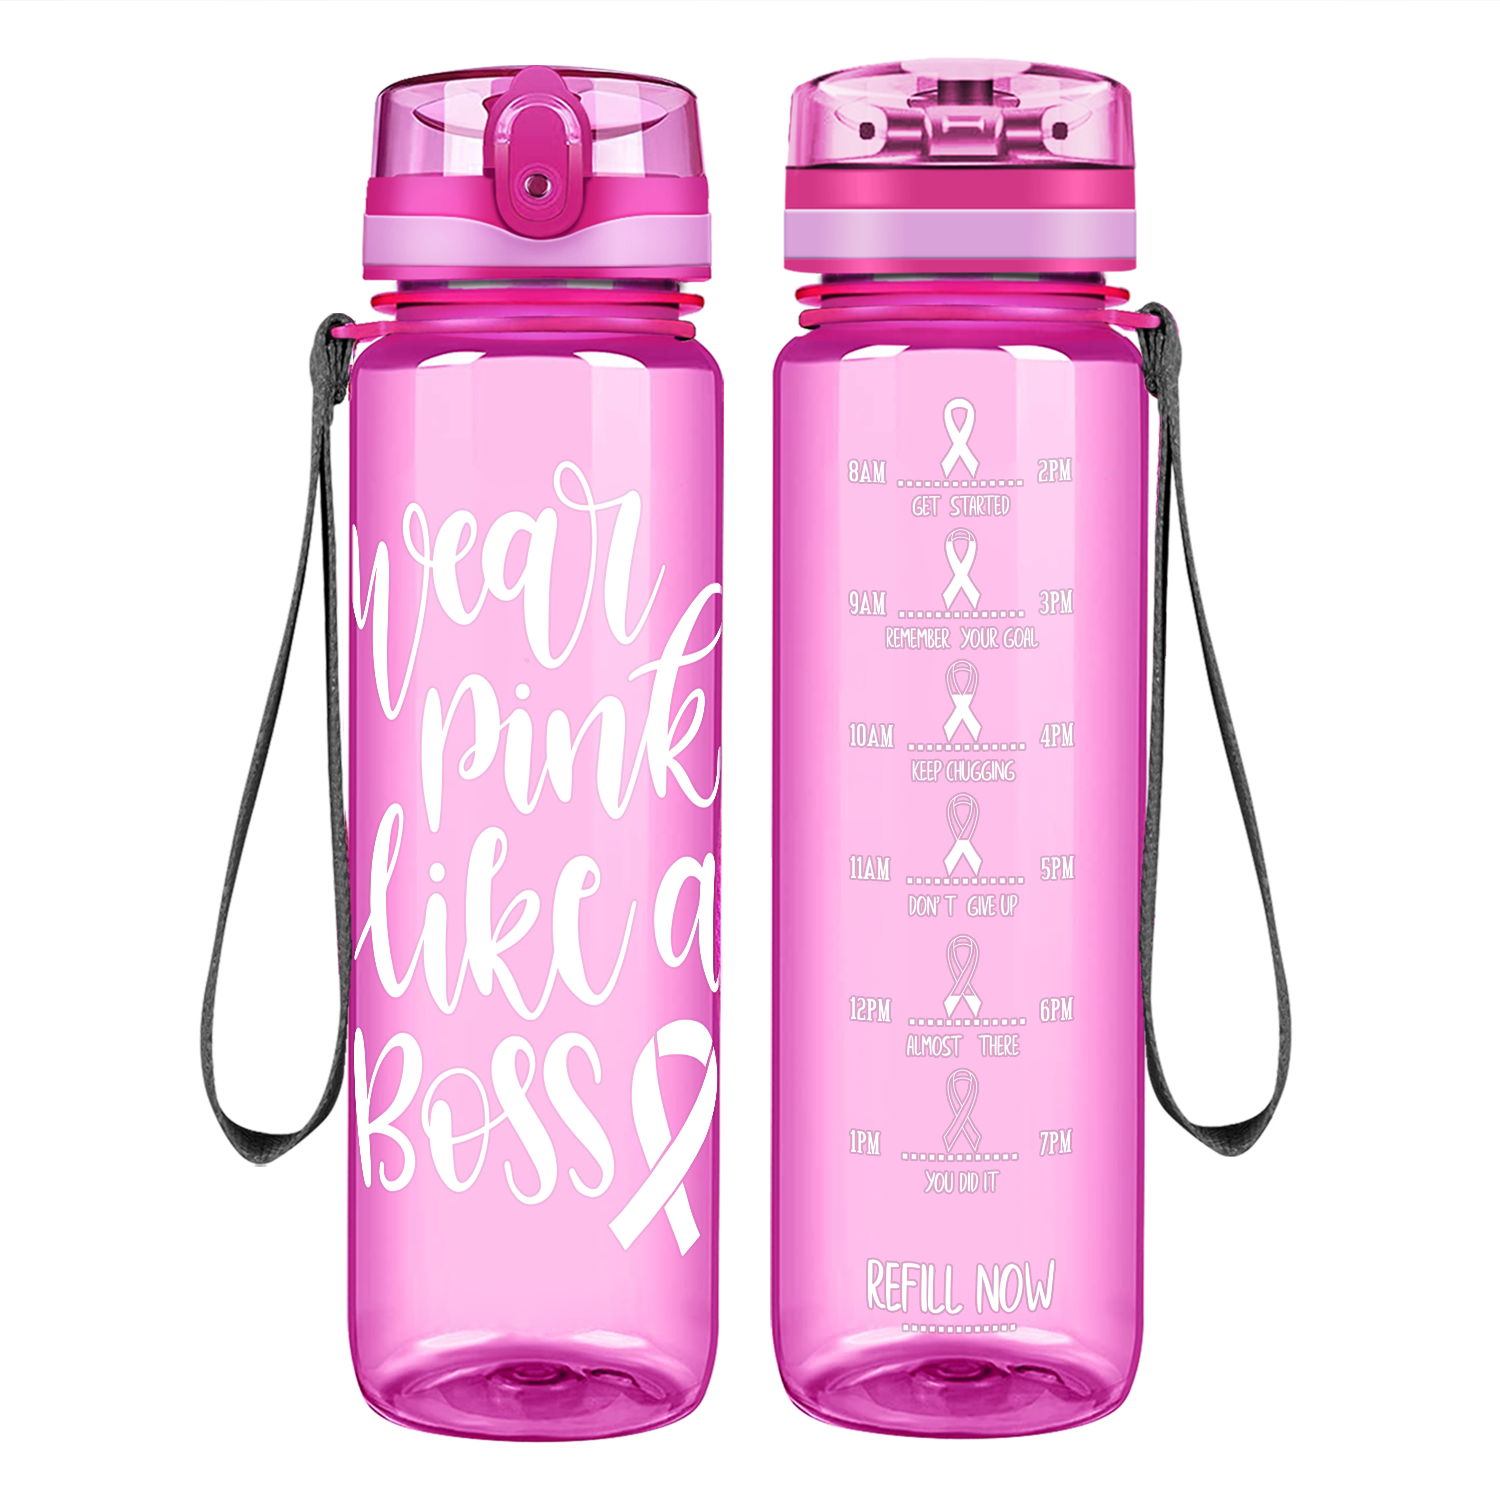 Wear Pink Like a Boss on 32 oz Motivational Tracking Breast Cancer Awareness Water Bottle